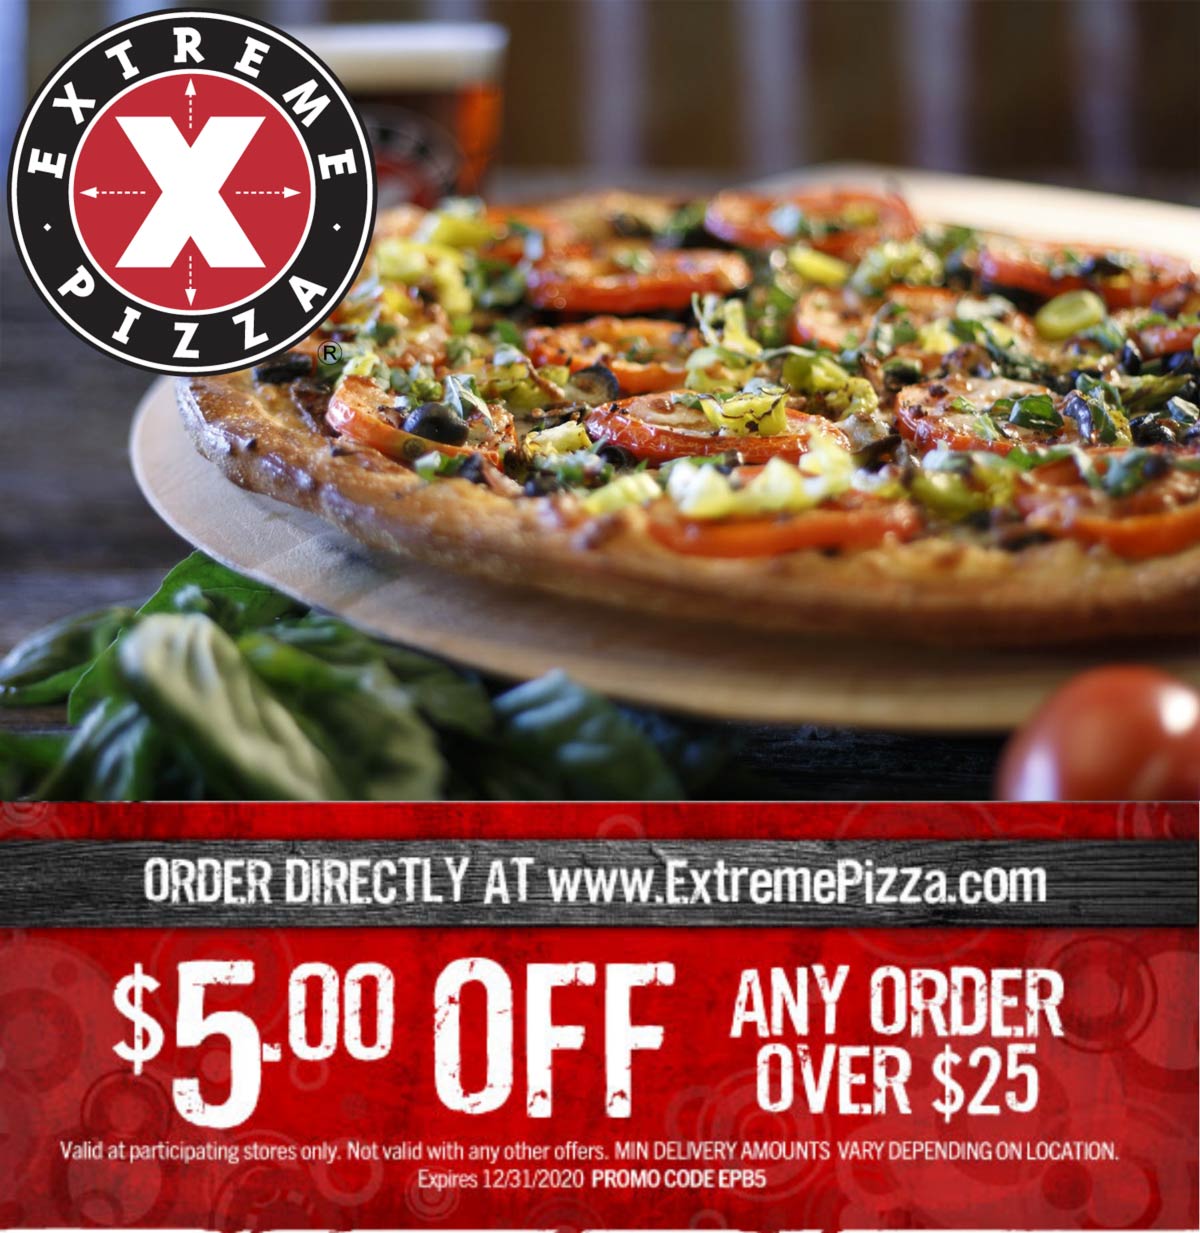 Extreme Pizza restaurants Coupon  $5 off $25 at Extreme Pizza #extremepizza 